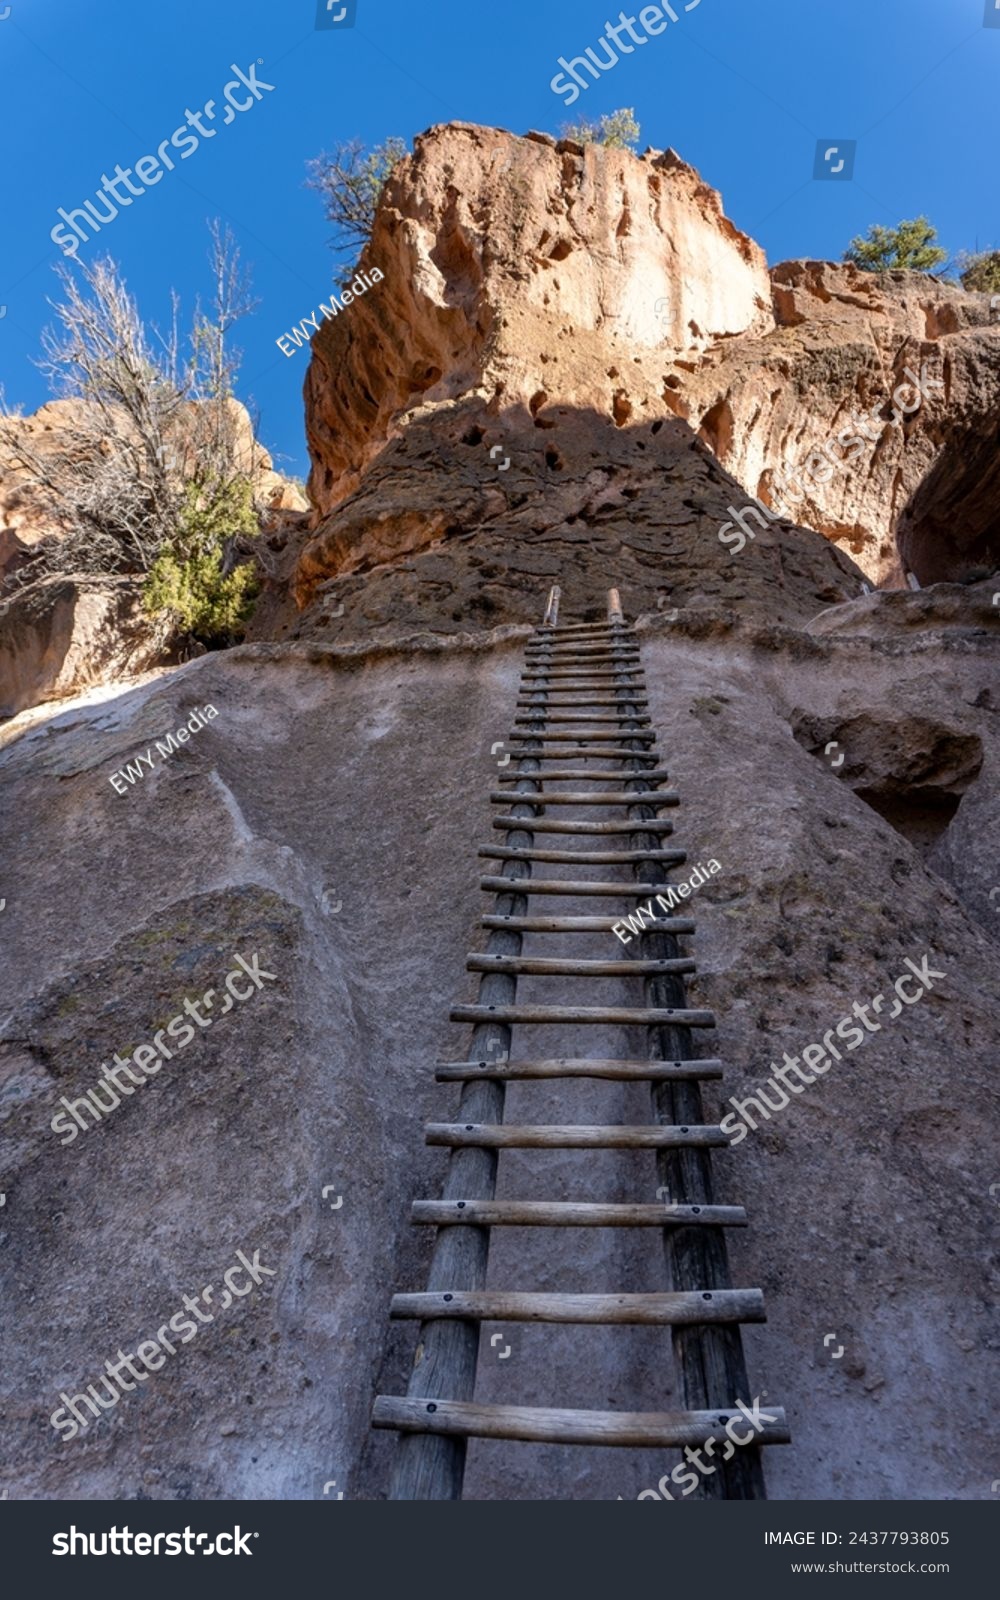 Wood ladder to Alcove House in Bandelier National Monument. Ancestral Puebloan home in New Mexico. Long log ladder up cliff face to reach the lofty home above the Frijoles Canyon. #2437793805